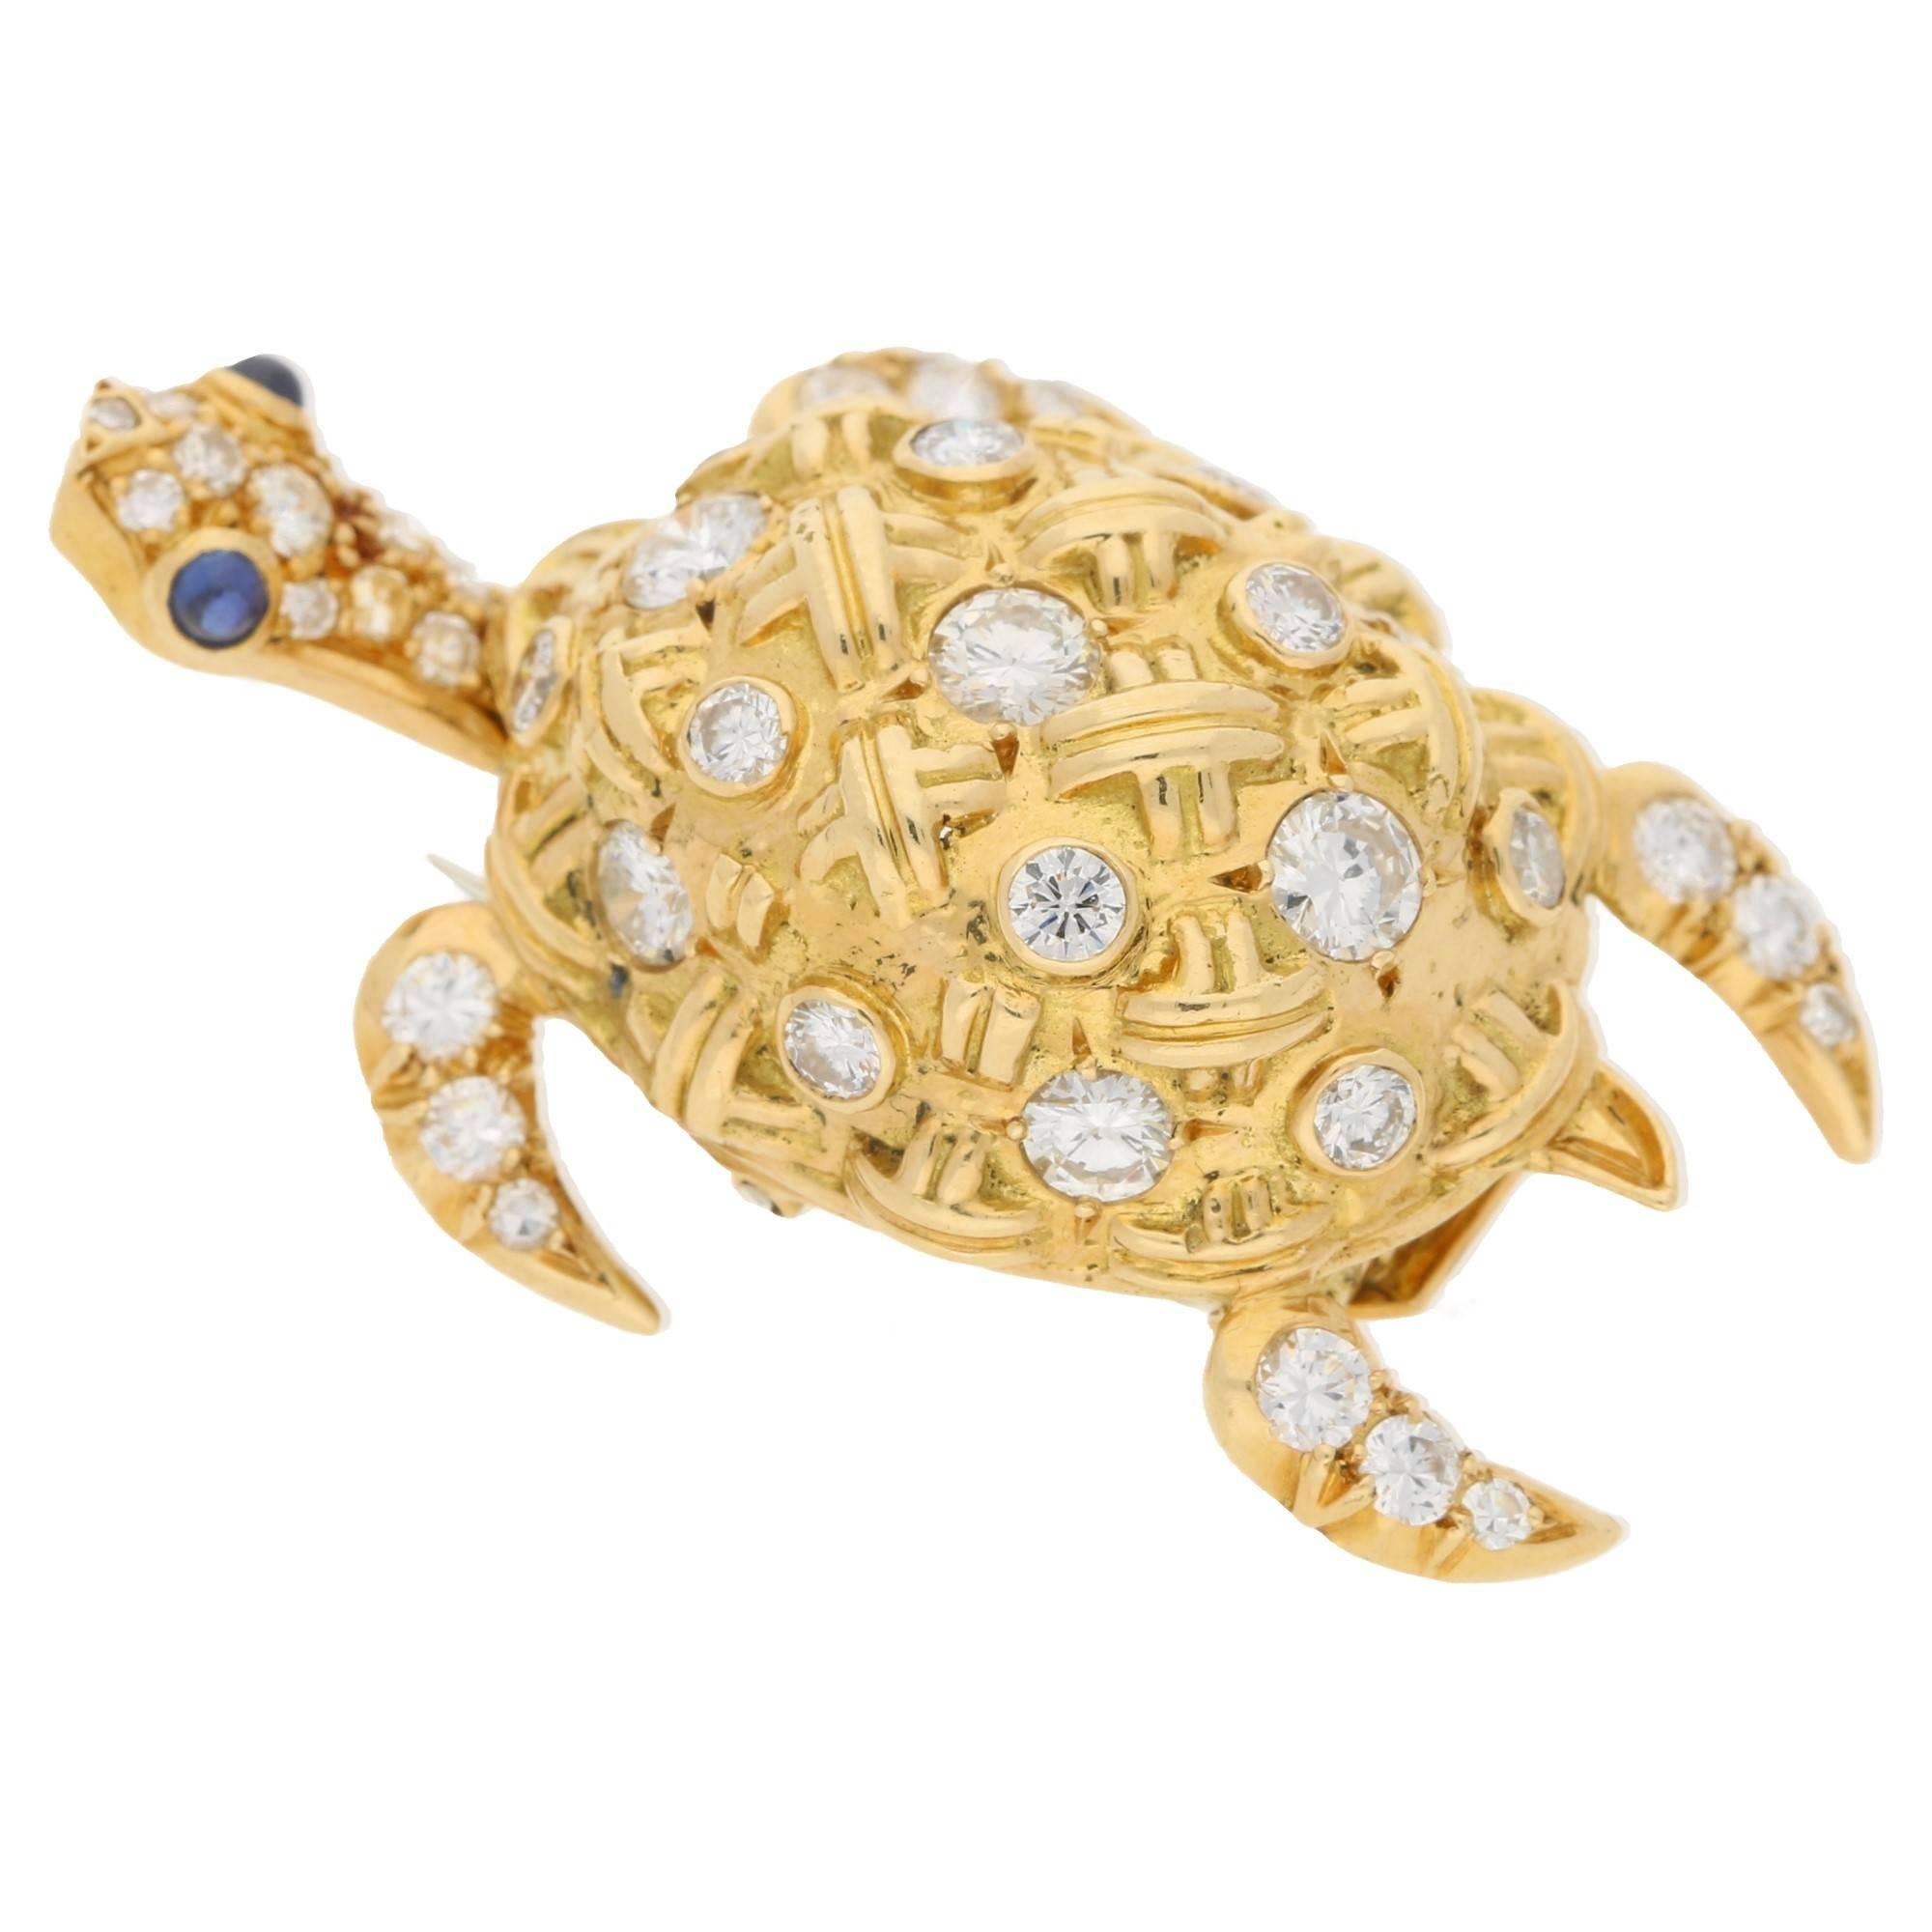 A diamond and gold brooch. The brooch is in the designed of a sea turtle with a brilliant-cut diamond and cross motif shell and round brilliant-cut diamond limbs, the articulated head is set with sapphires as eye details. Signed J.W. Estimated total